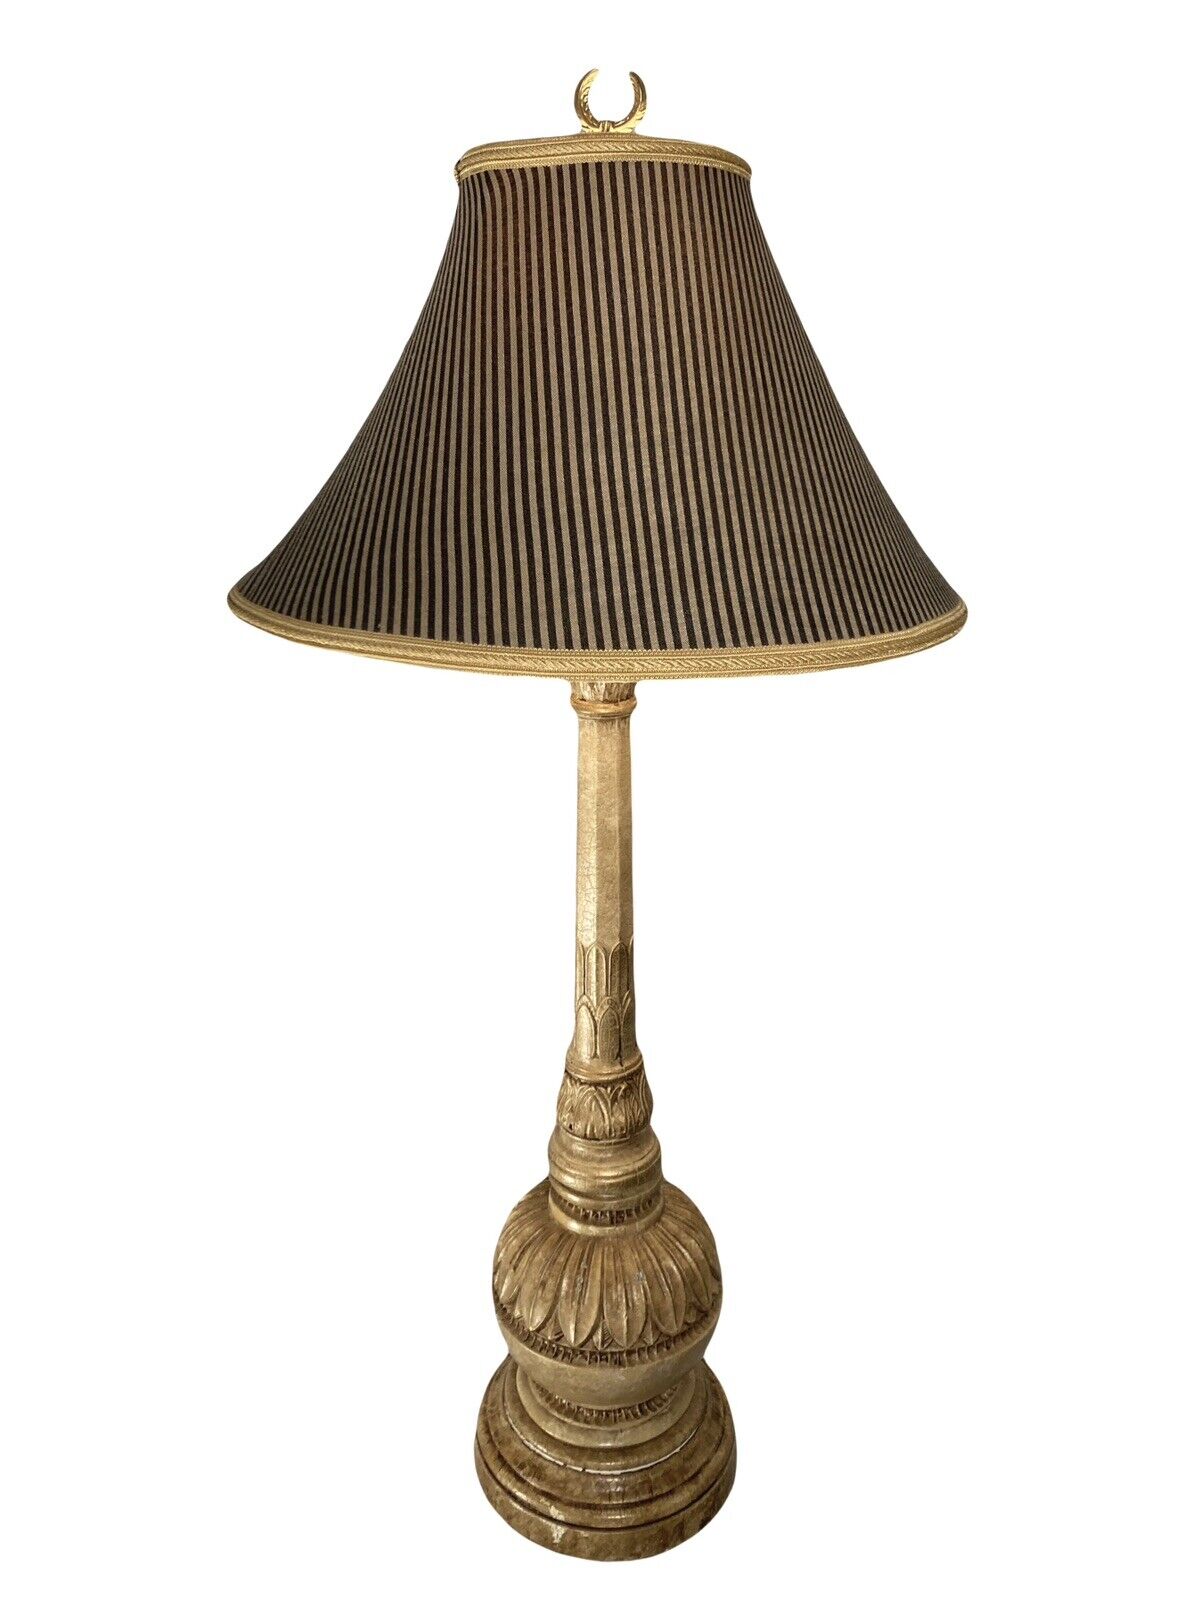 Vtg Wildwood Table Lamp With Original Wildwood Solid Hardware, Shade and Finial